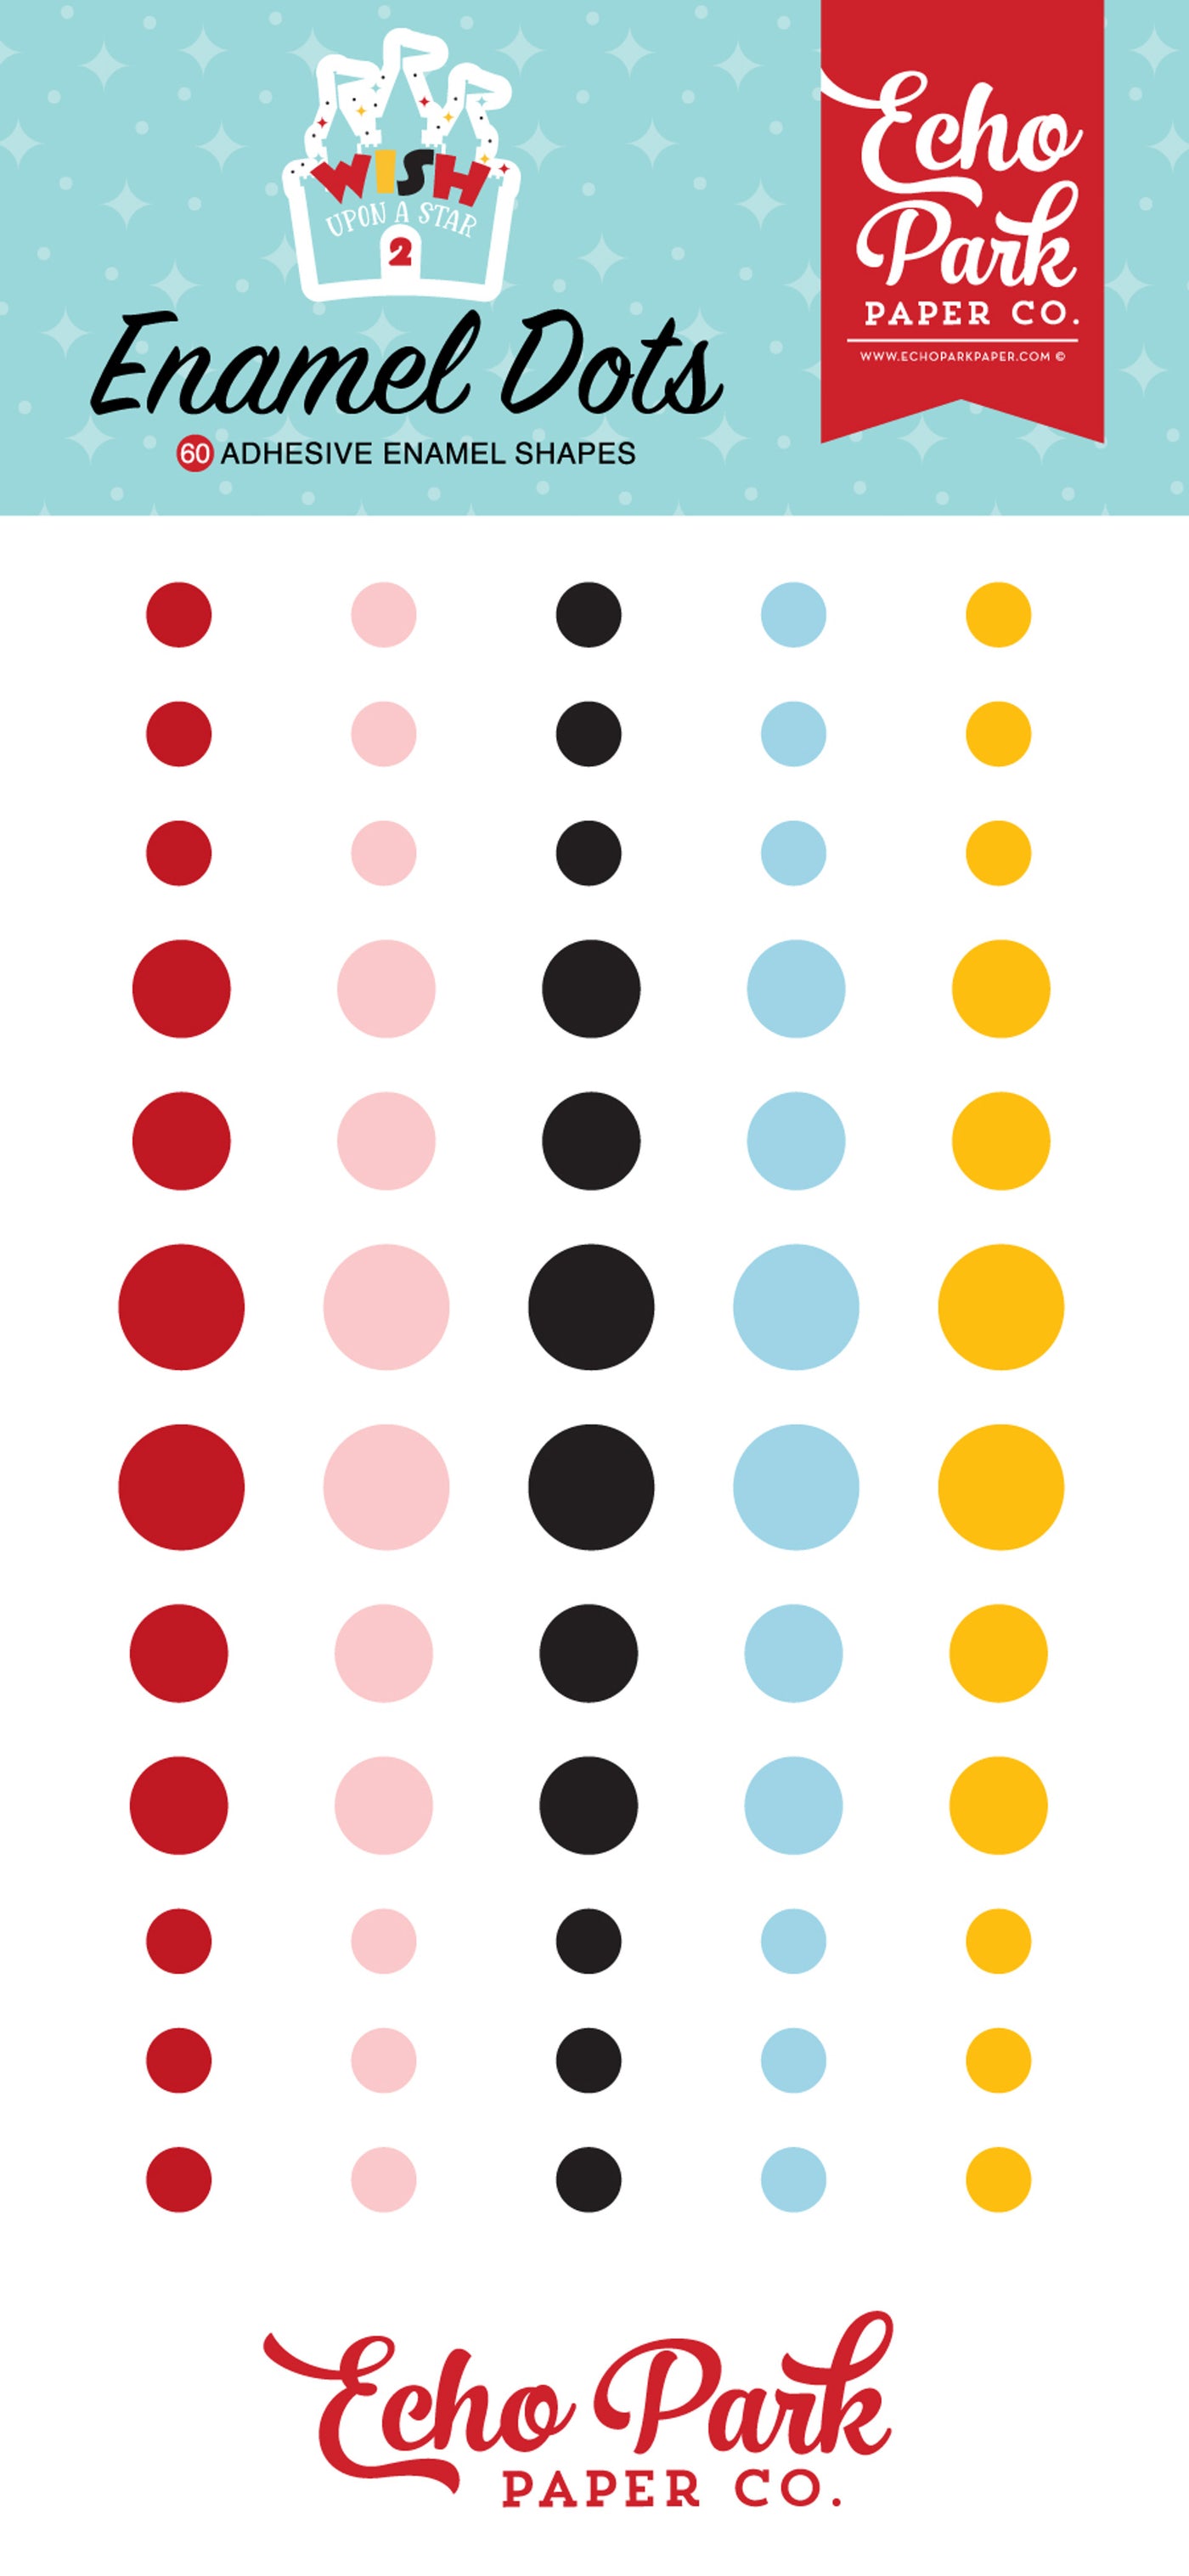 Sixty Enamel Dots in 5 coordinated bright colors. Three sizes. Adhesive back. Designed to coordinate with any paper craft project. Echo Park Paper Co.